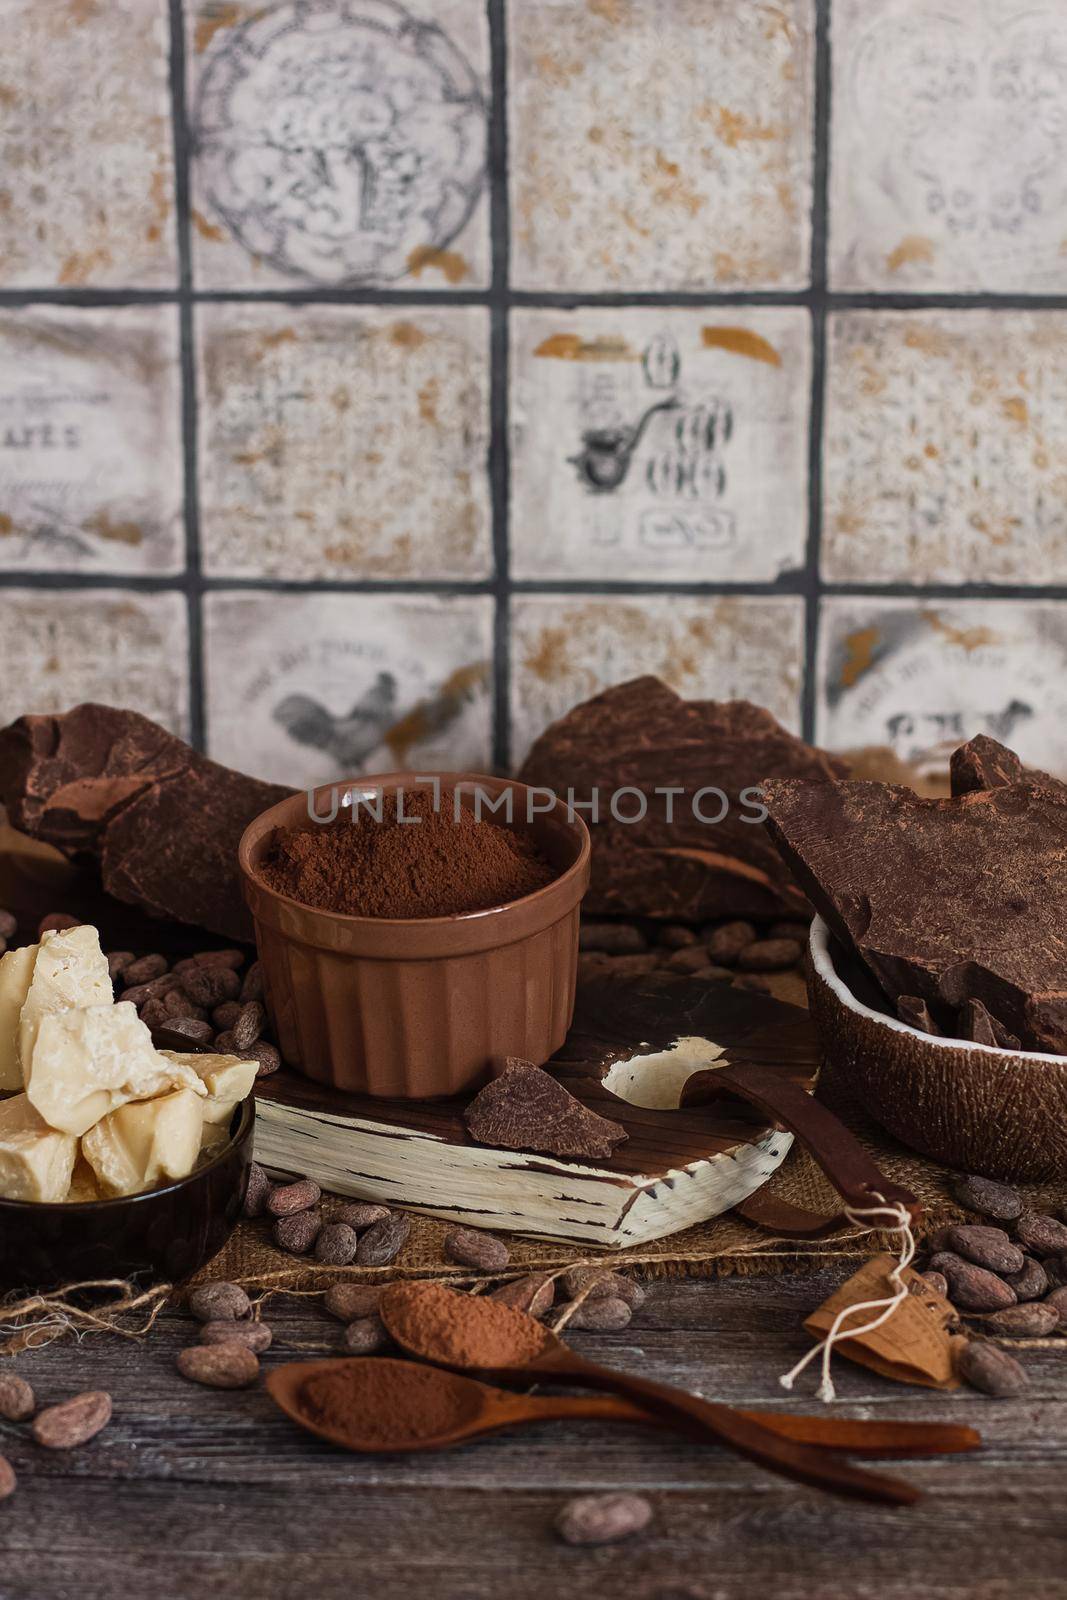 Unsweetened baking block chocolate, cocoa powder, cocoa butter and cocoa beans on old wooden background by mmp1206